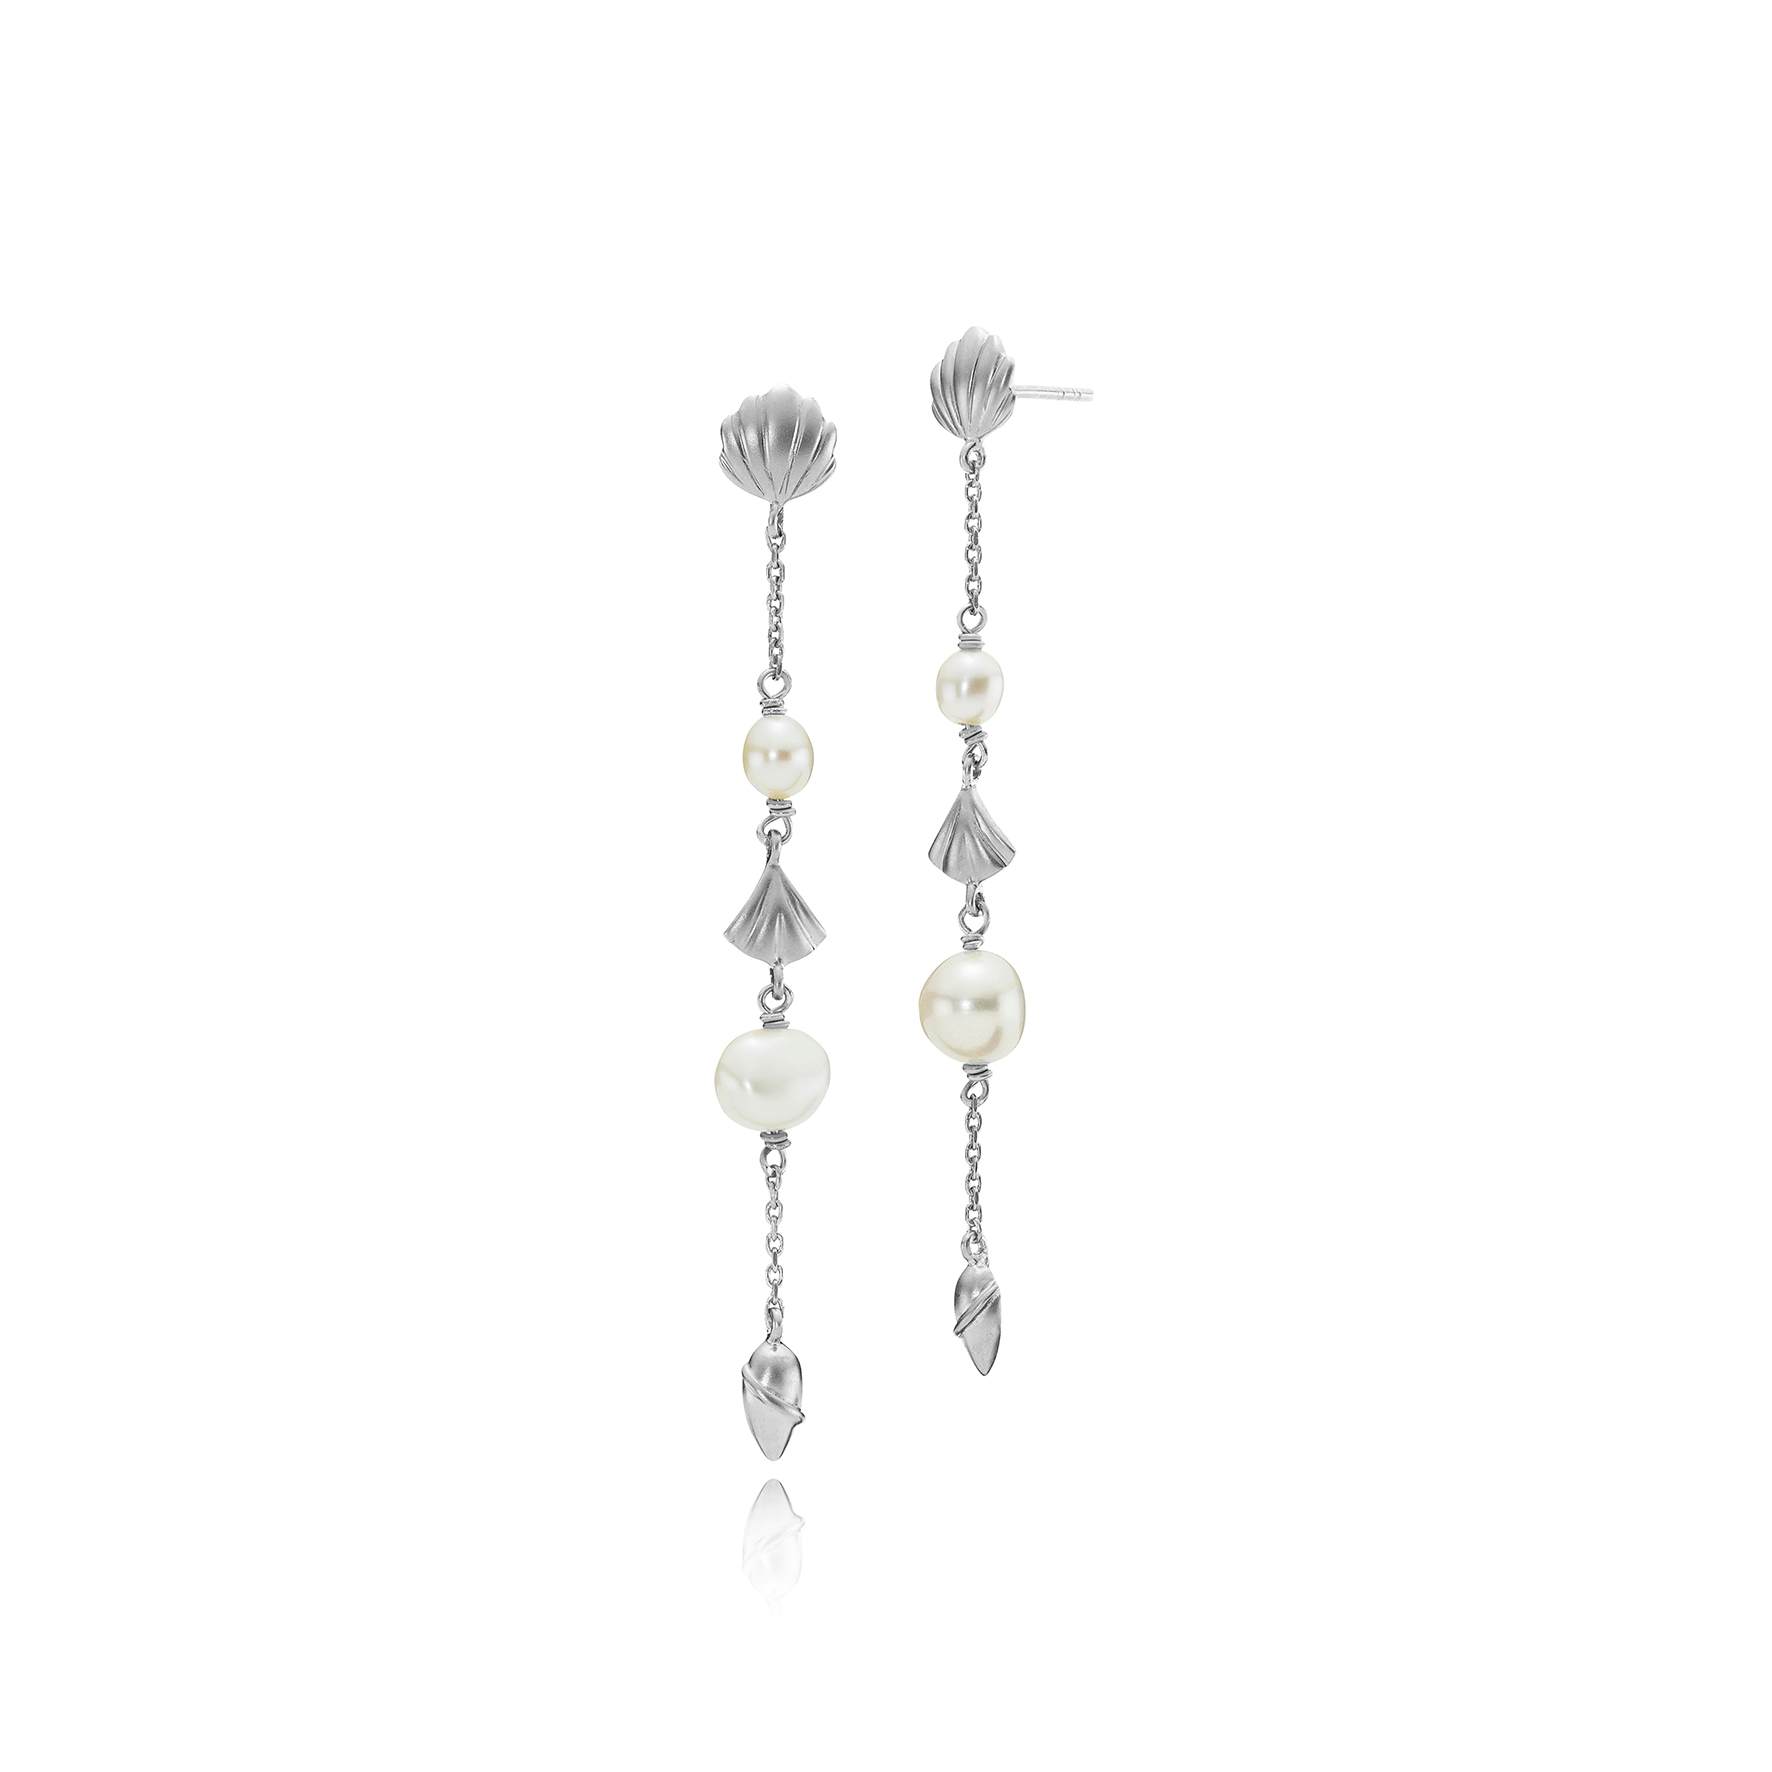 Isabella White Long Earrings from Izabel Camille in Silver Sterling 925